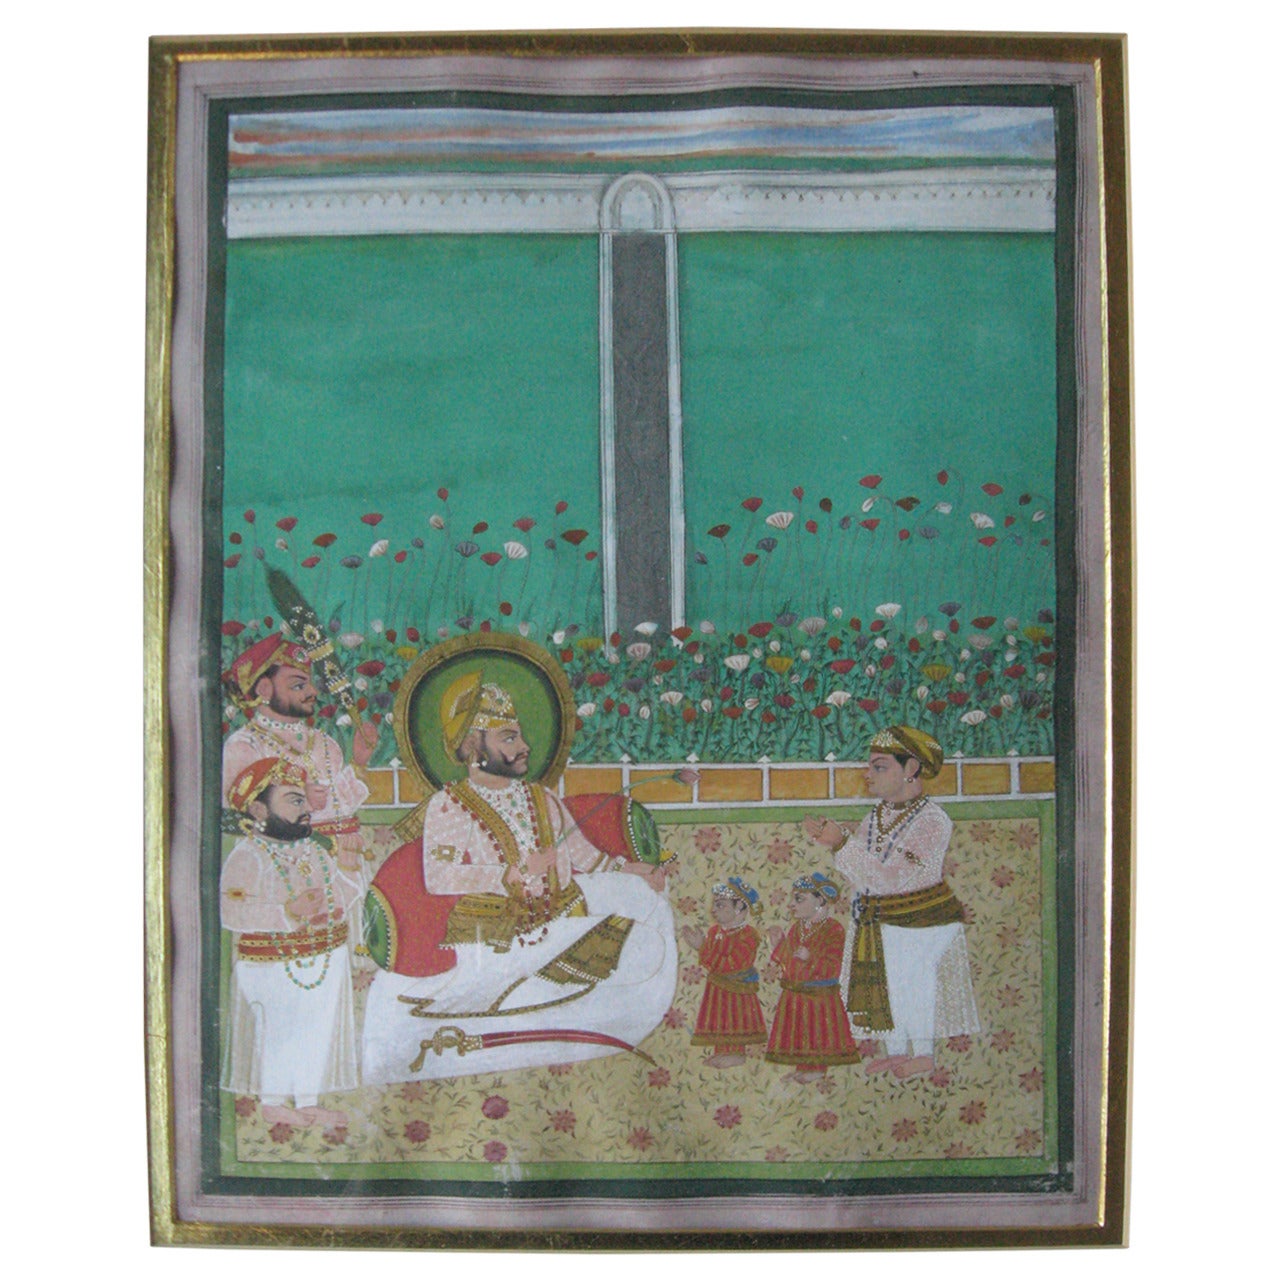 Set of Seven 19th Century Indian Miniature Paintings